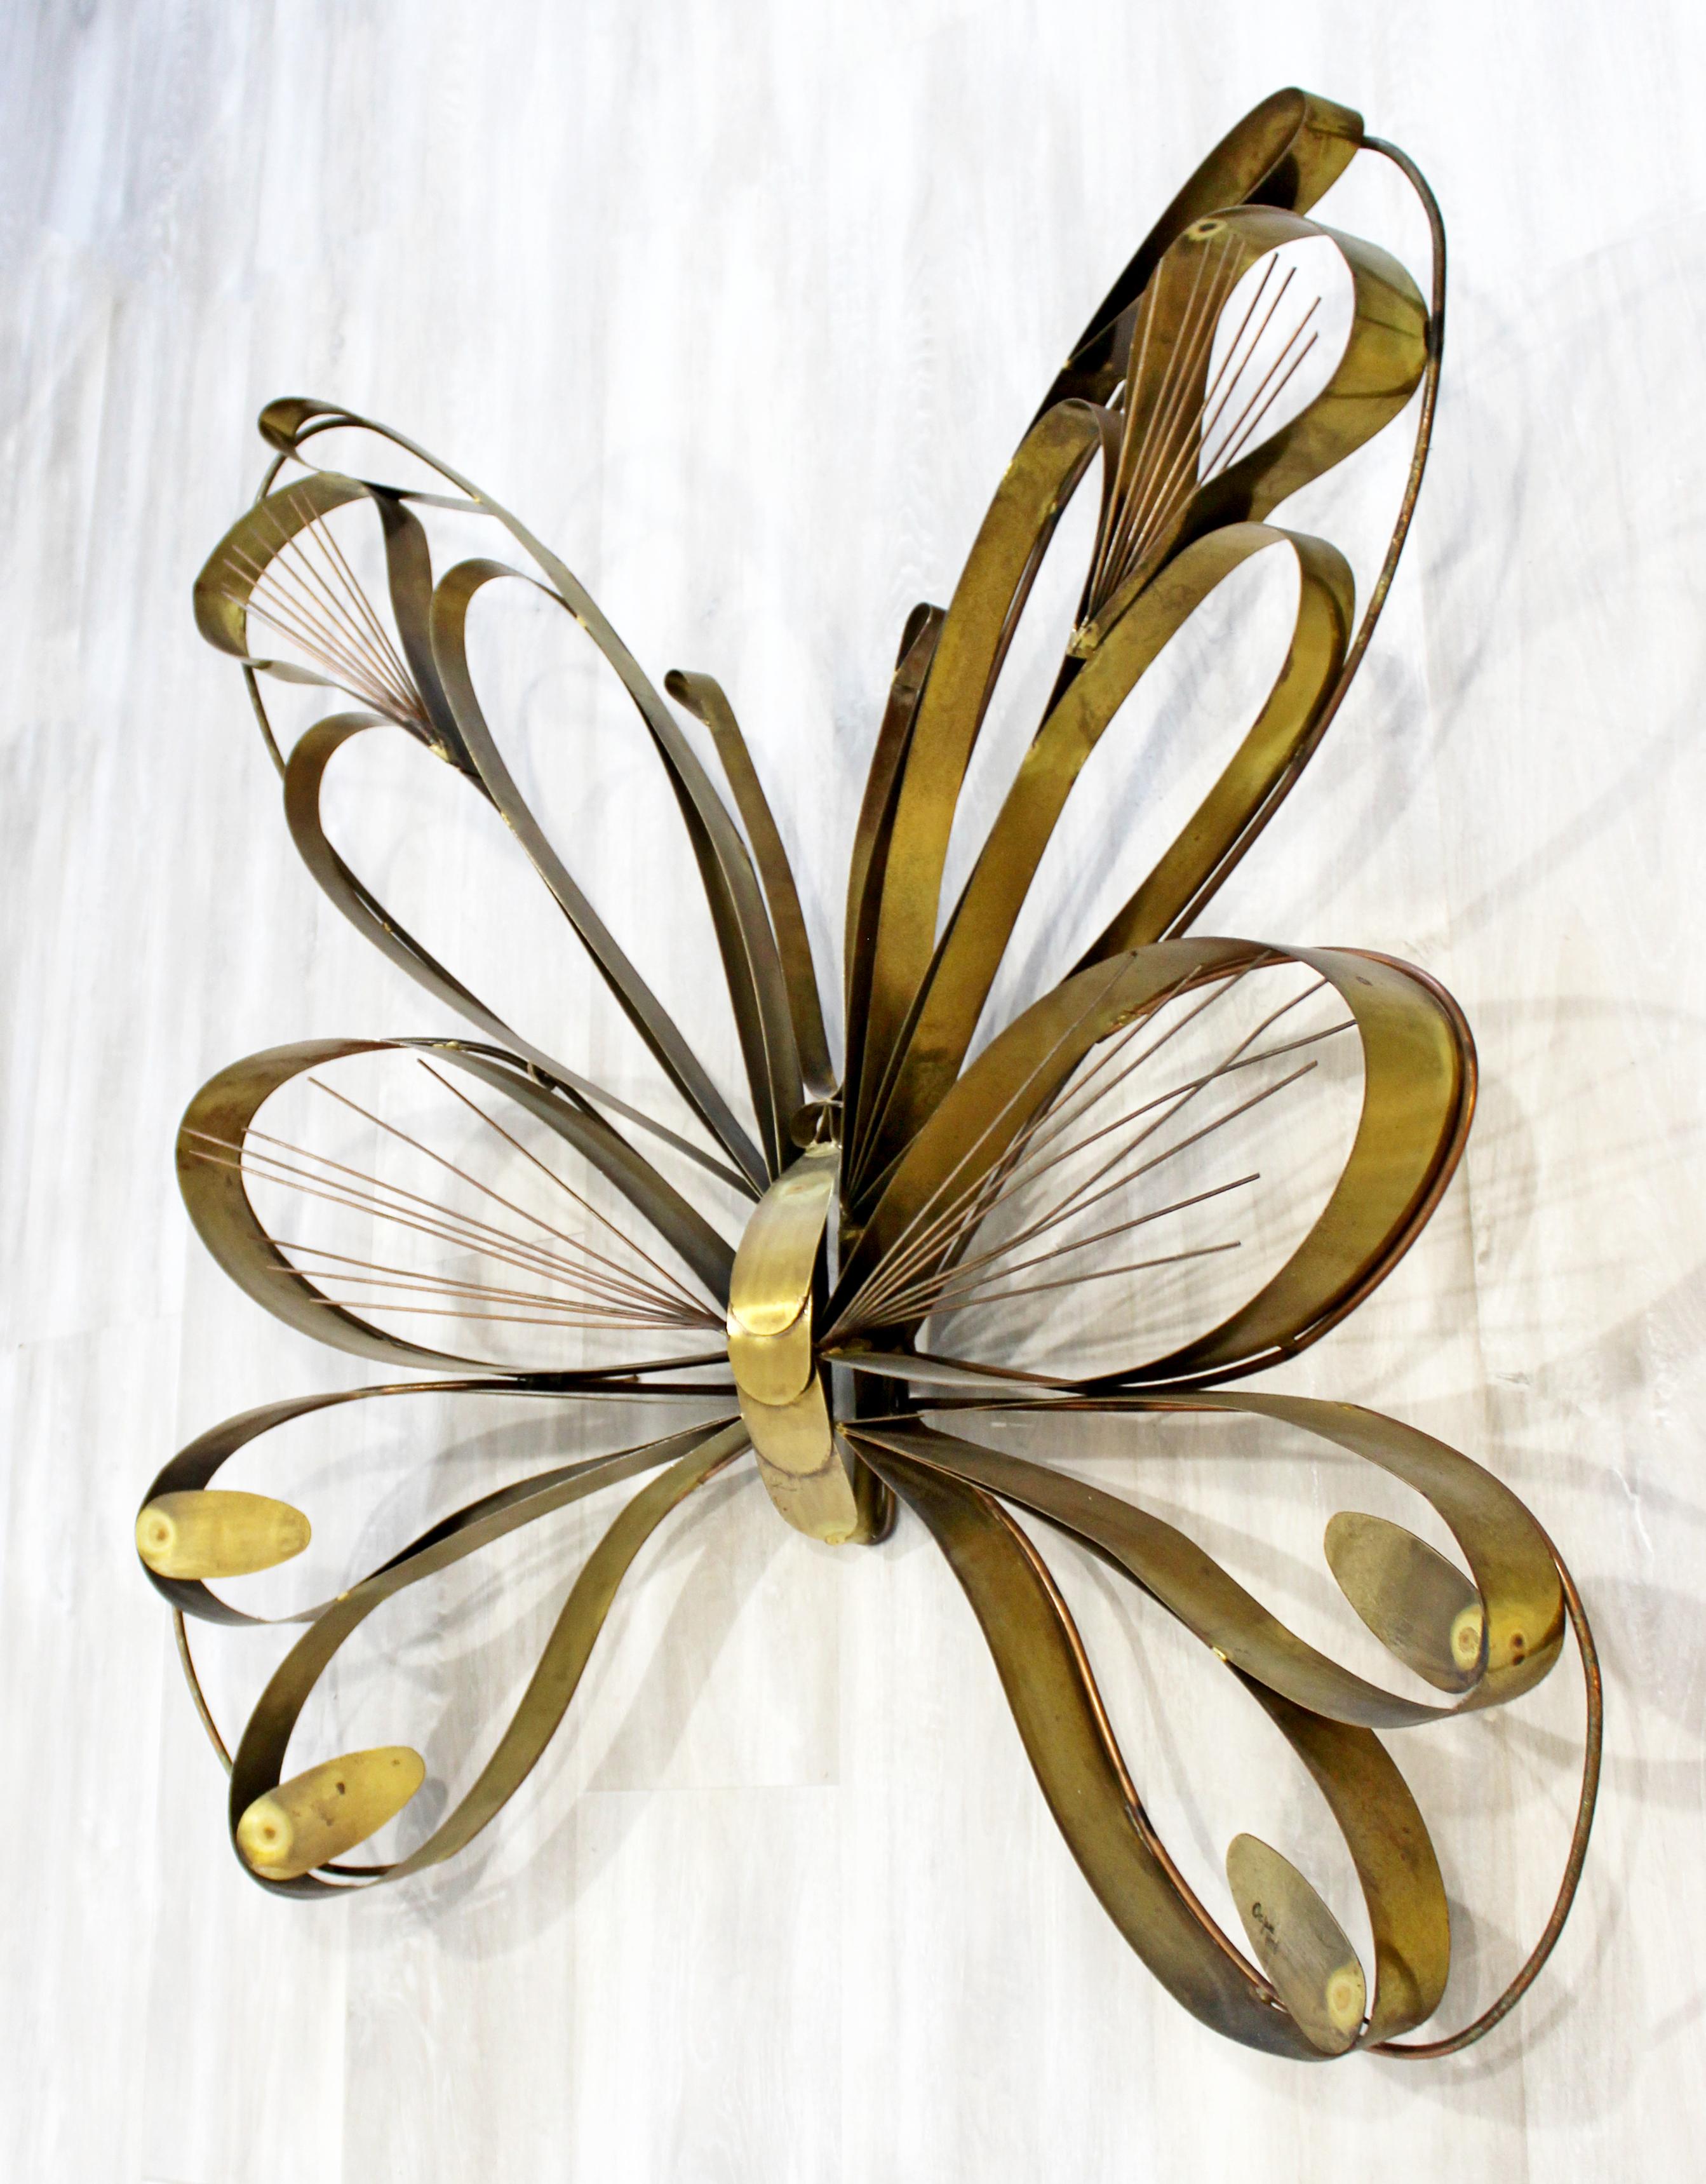 For your consideration is a gorgeous wall sculpture, made of brass and depicting a large butterfly, signed Curtis Jere, dated 1978. In excellent condition. The dimensions are 34